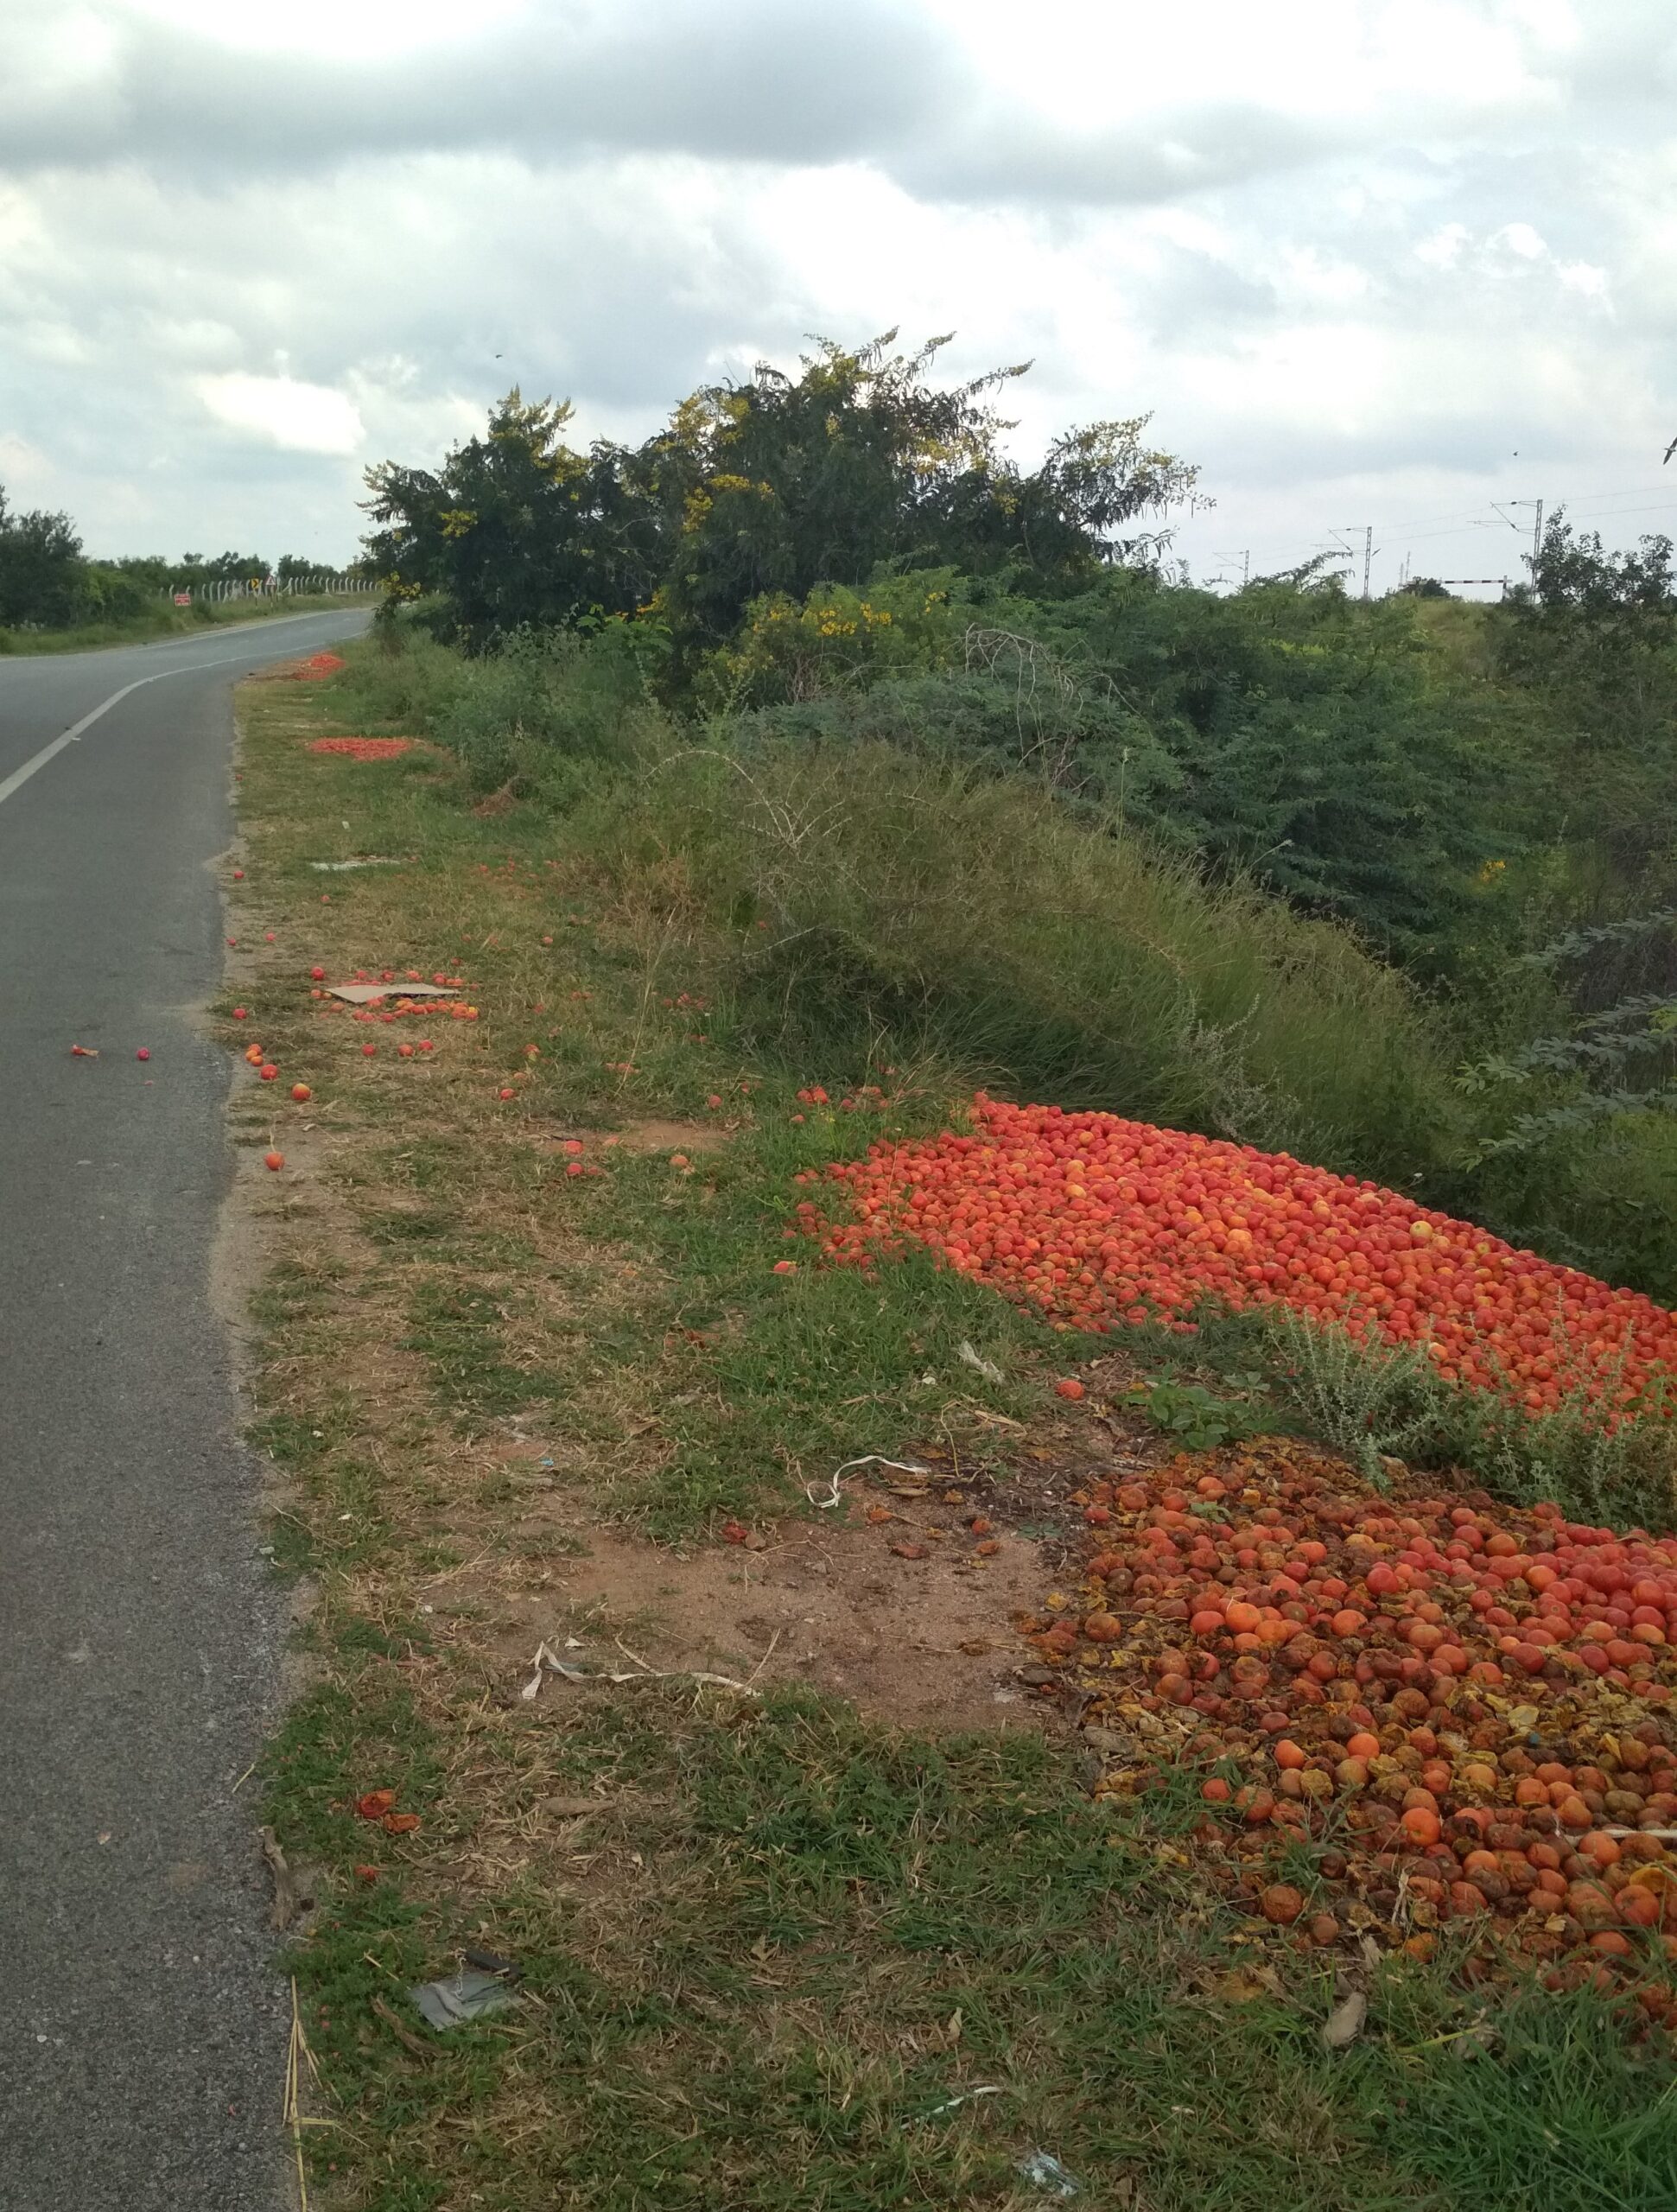 Piles of tomatoes lay discarded by a road near Anantapur, Andhra Pradesh